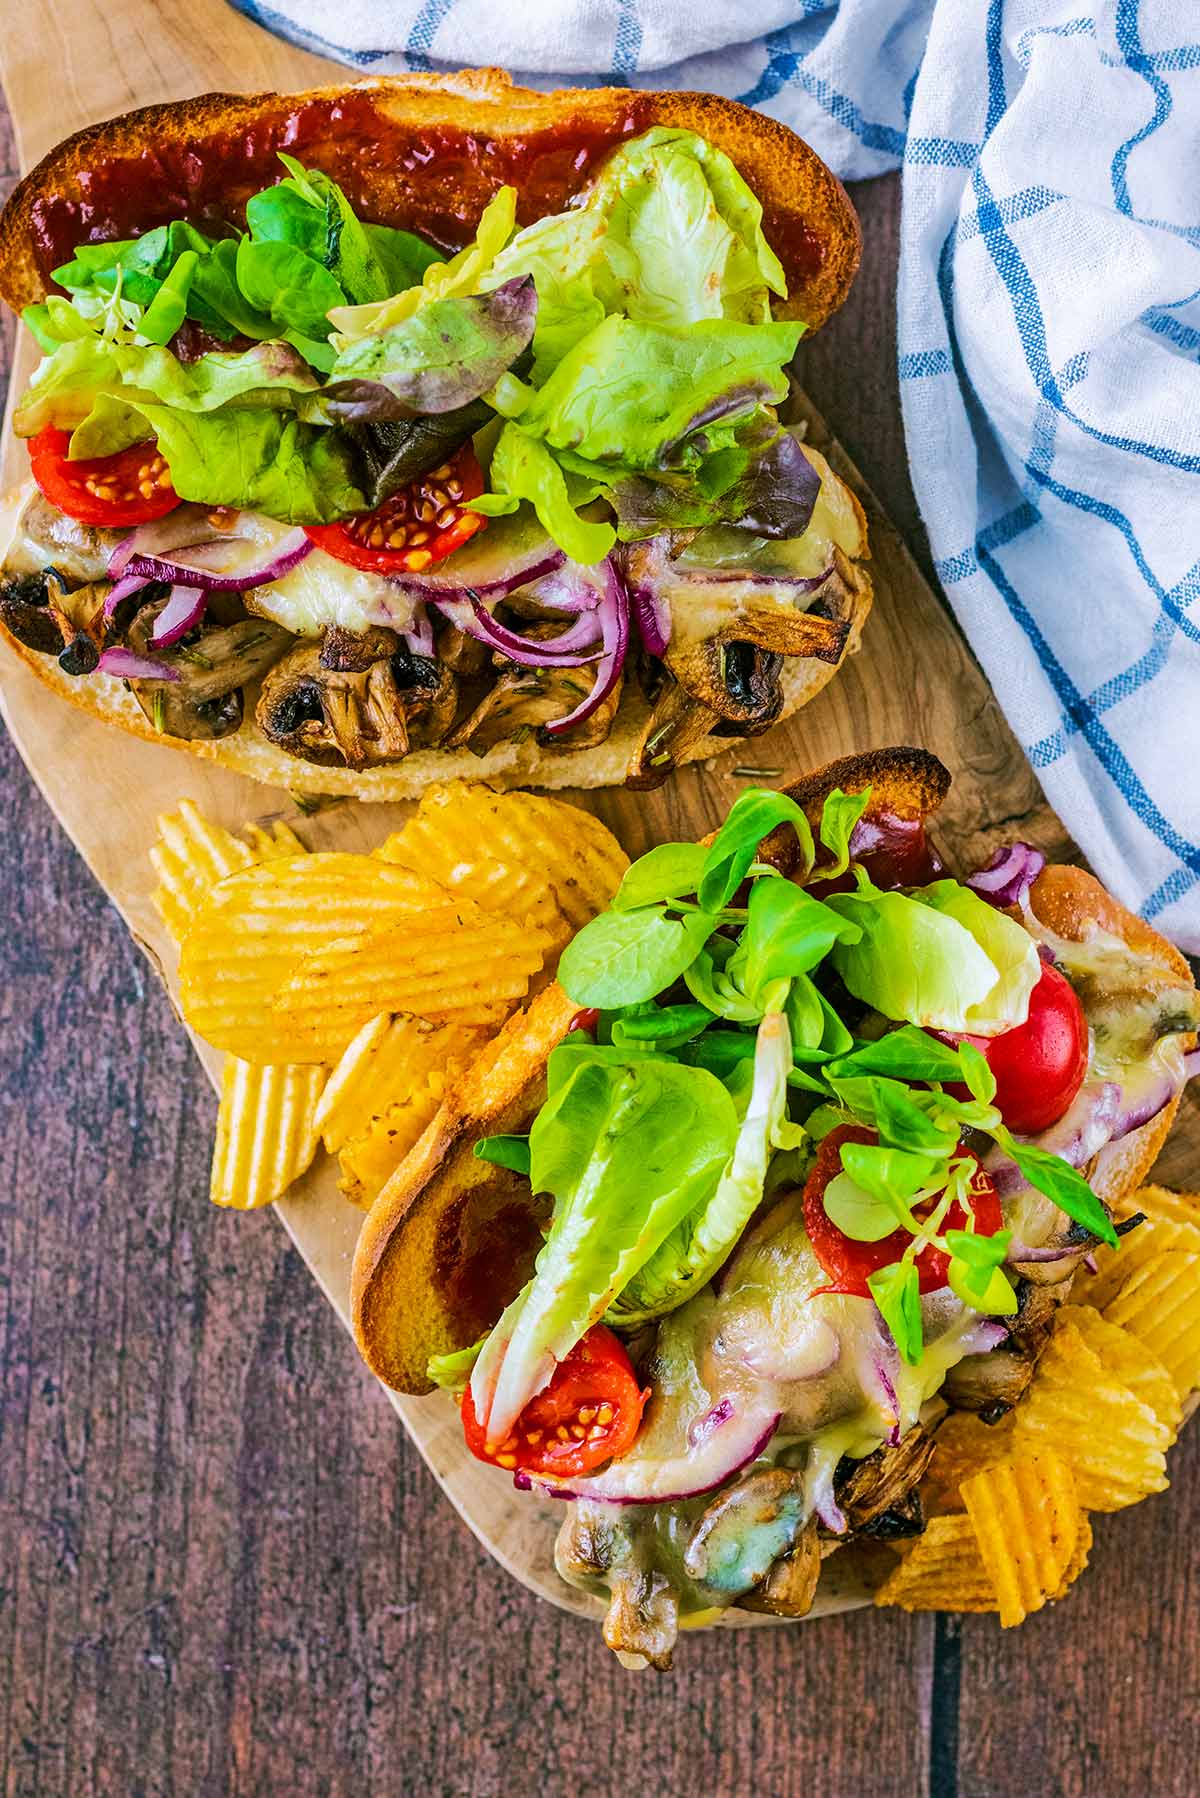 Two mushroom and salad sandwiches on a wooden serving board.